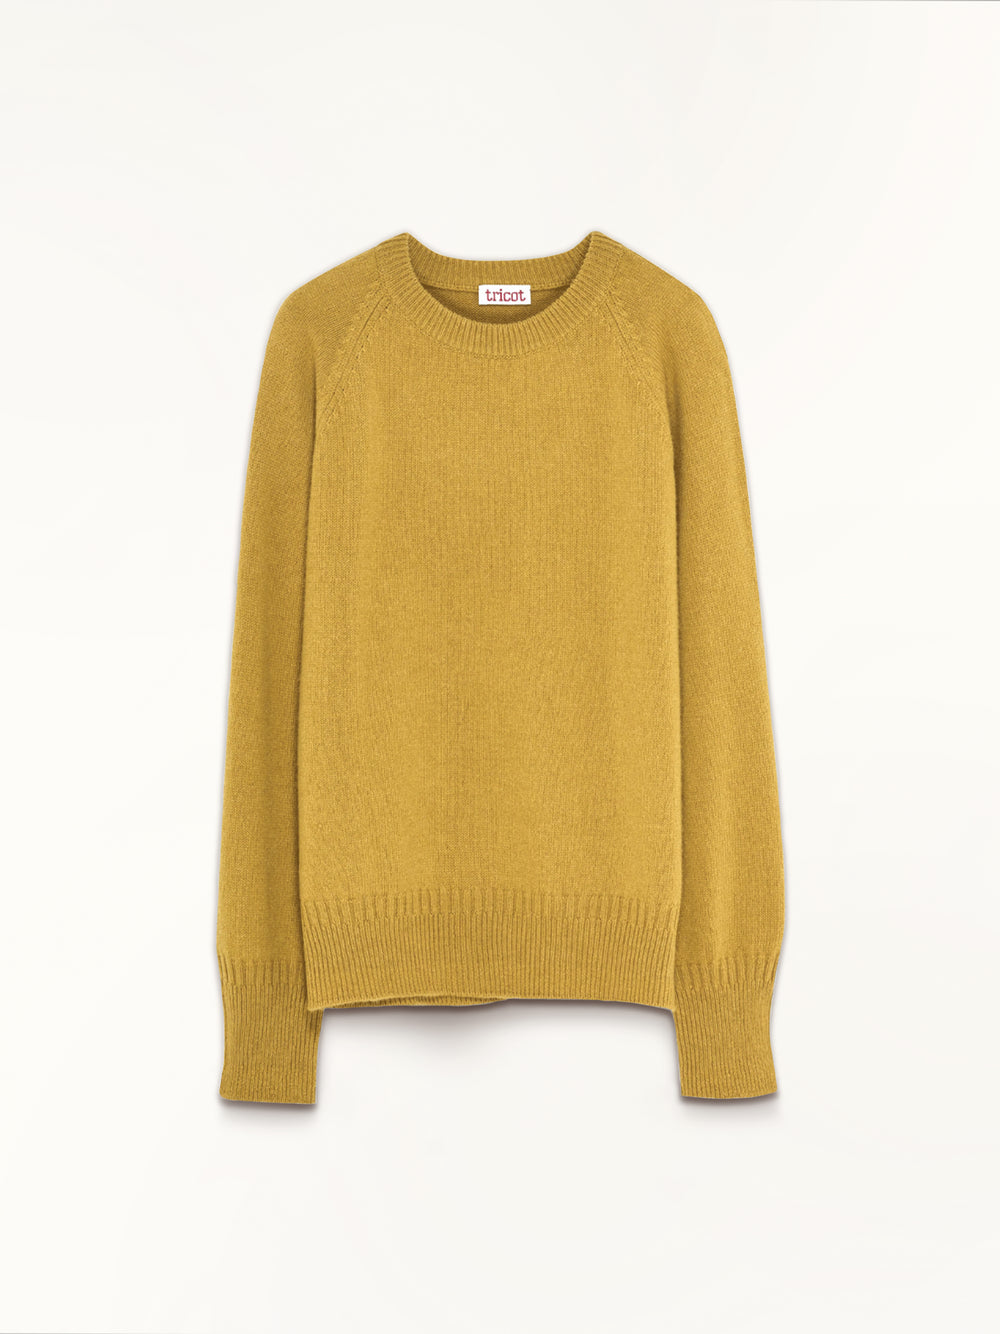 Crewneck cashmere sweater in yellow